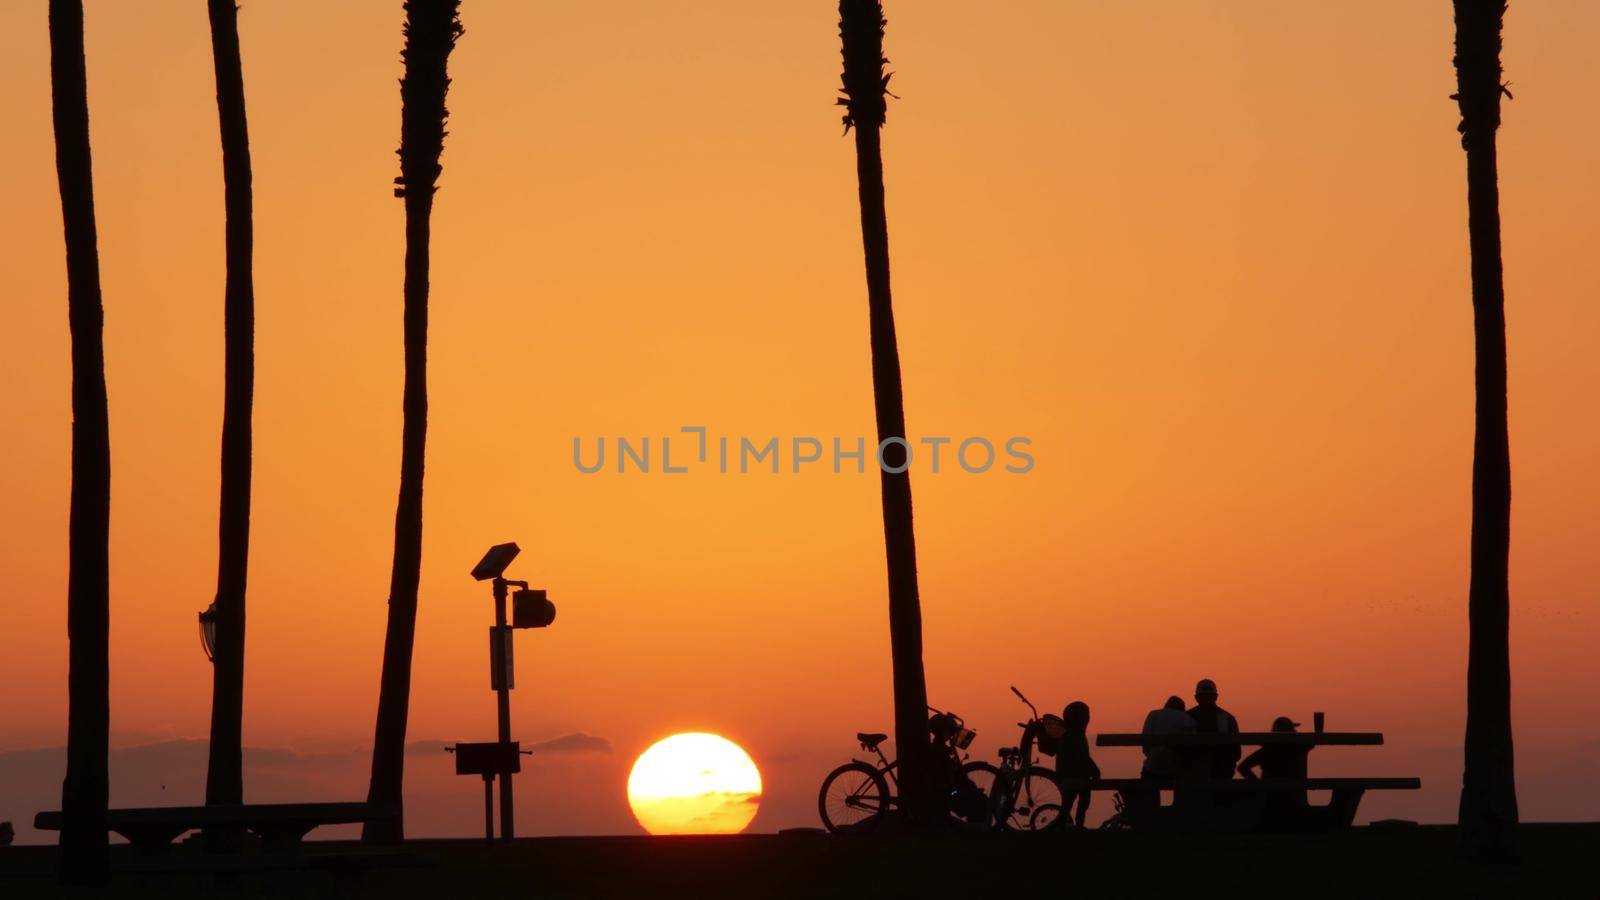 Silhouettes of people and palm trees on beach at sunset, California coast, USA. by DogoraSun